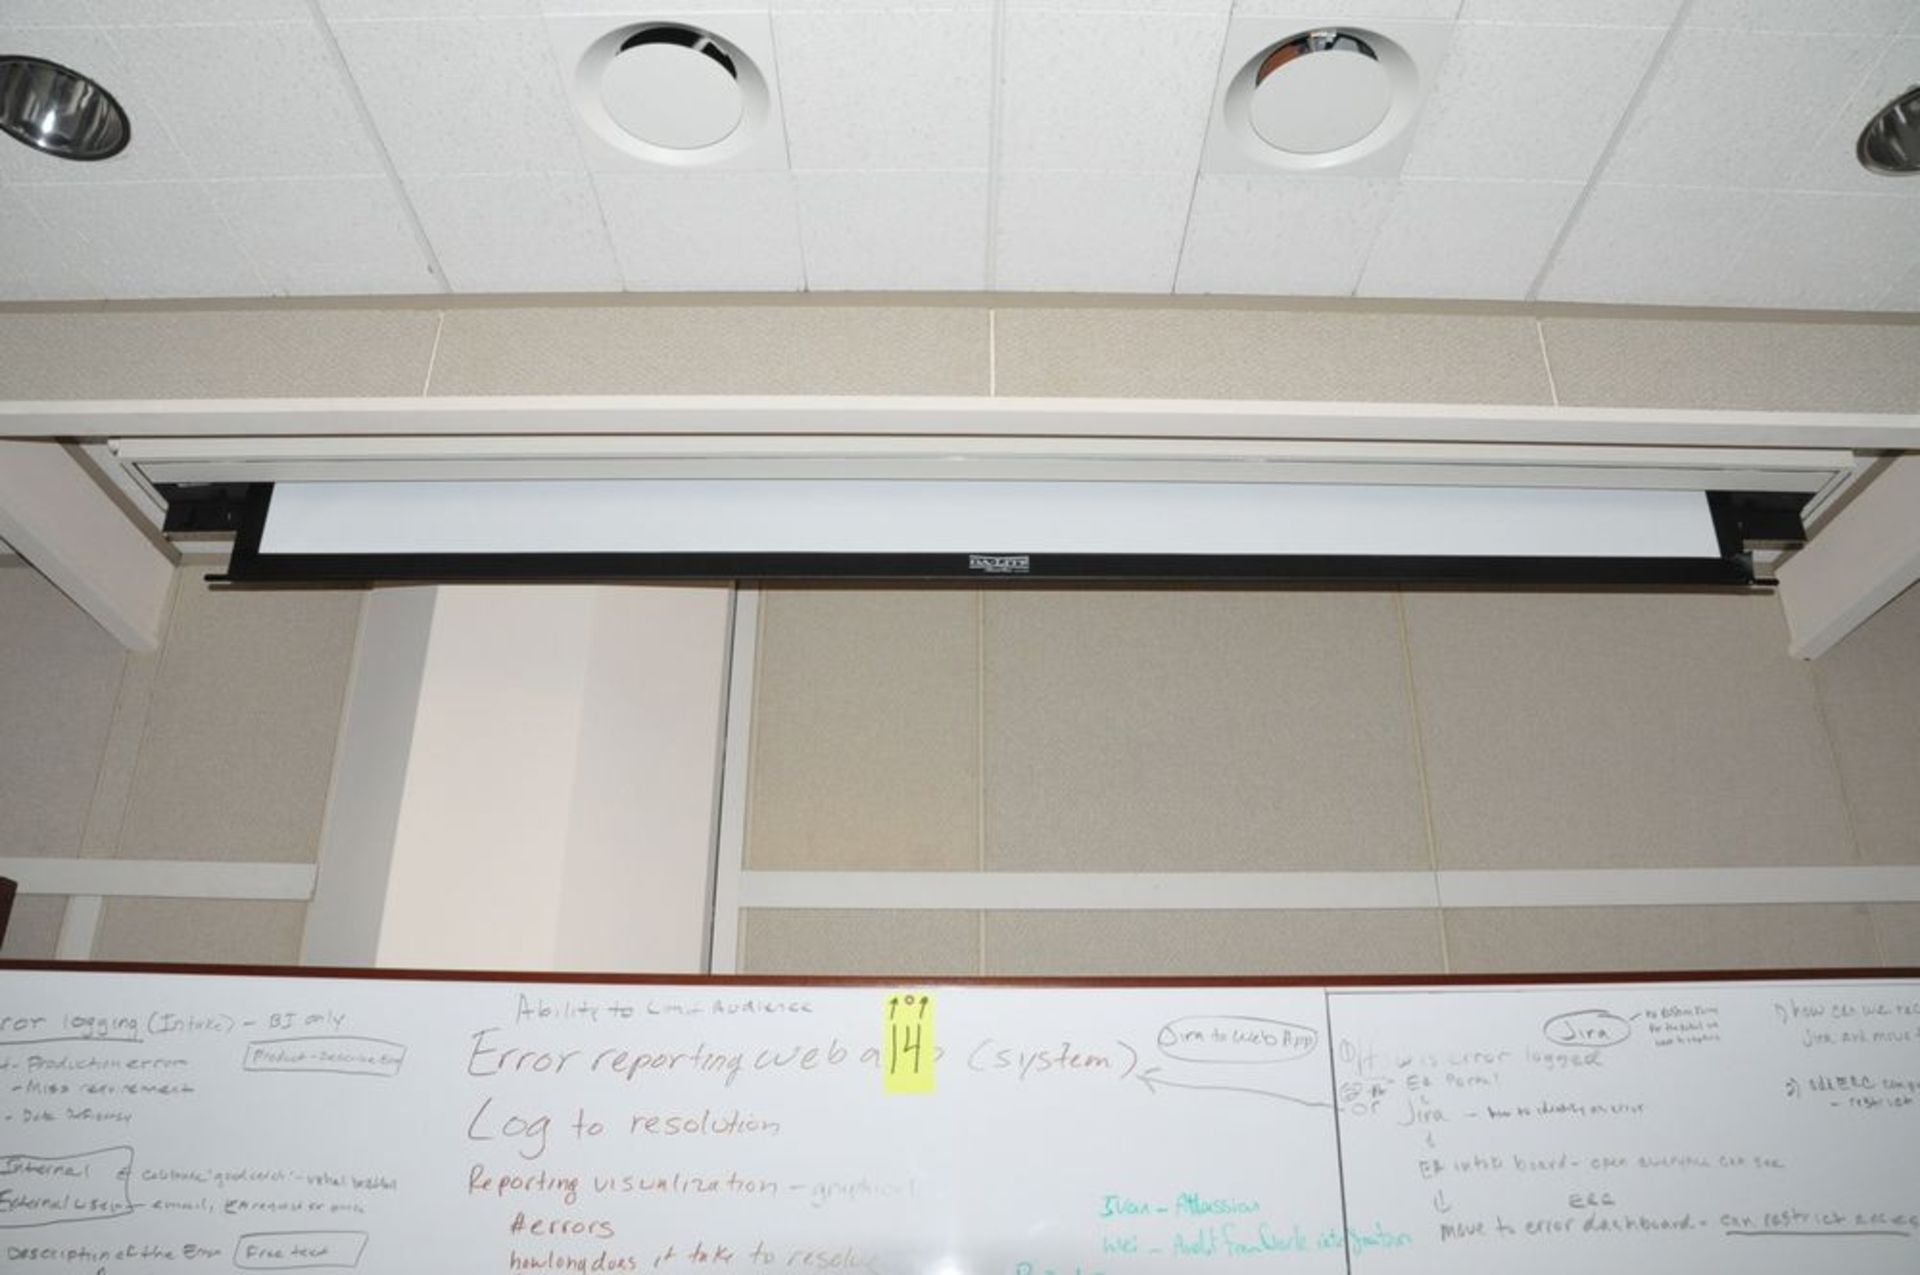 Lot-(2) Piece Dry Erase Board System and (1) Ceiling Mounted Projector Screen, in (1) Office, (TR4- - Image 3 of 3